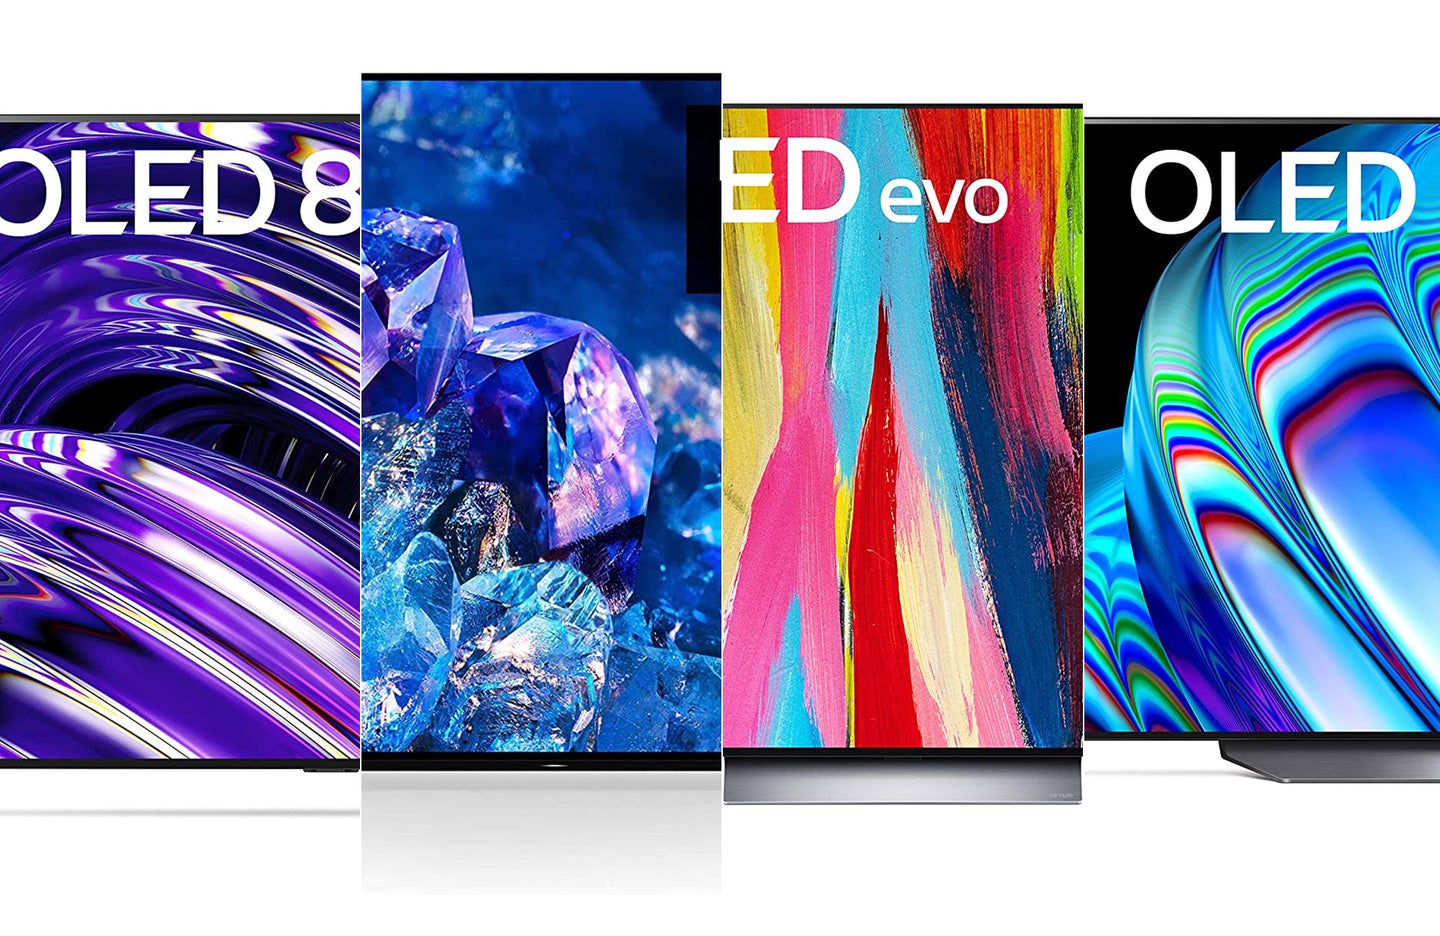 The best OLED TVs composited